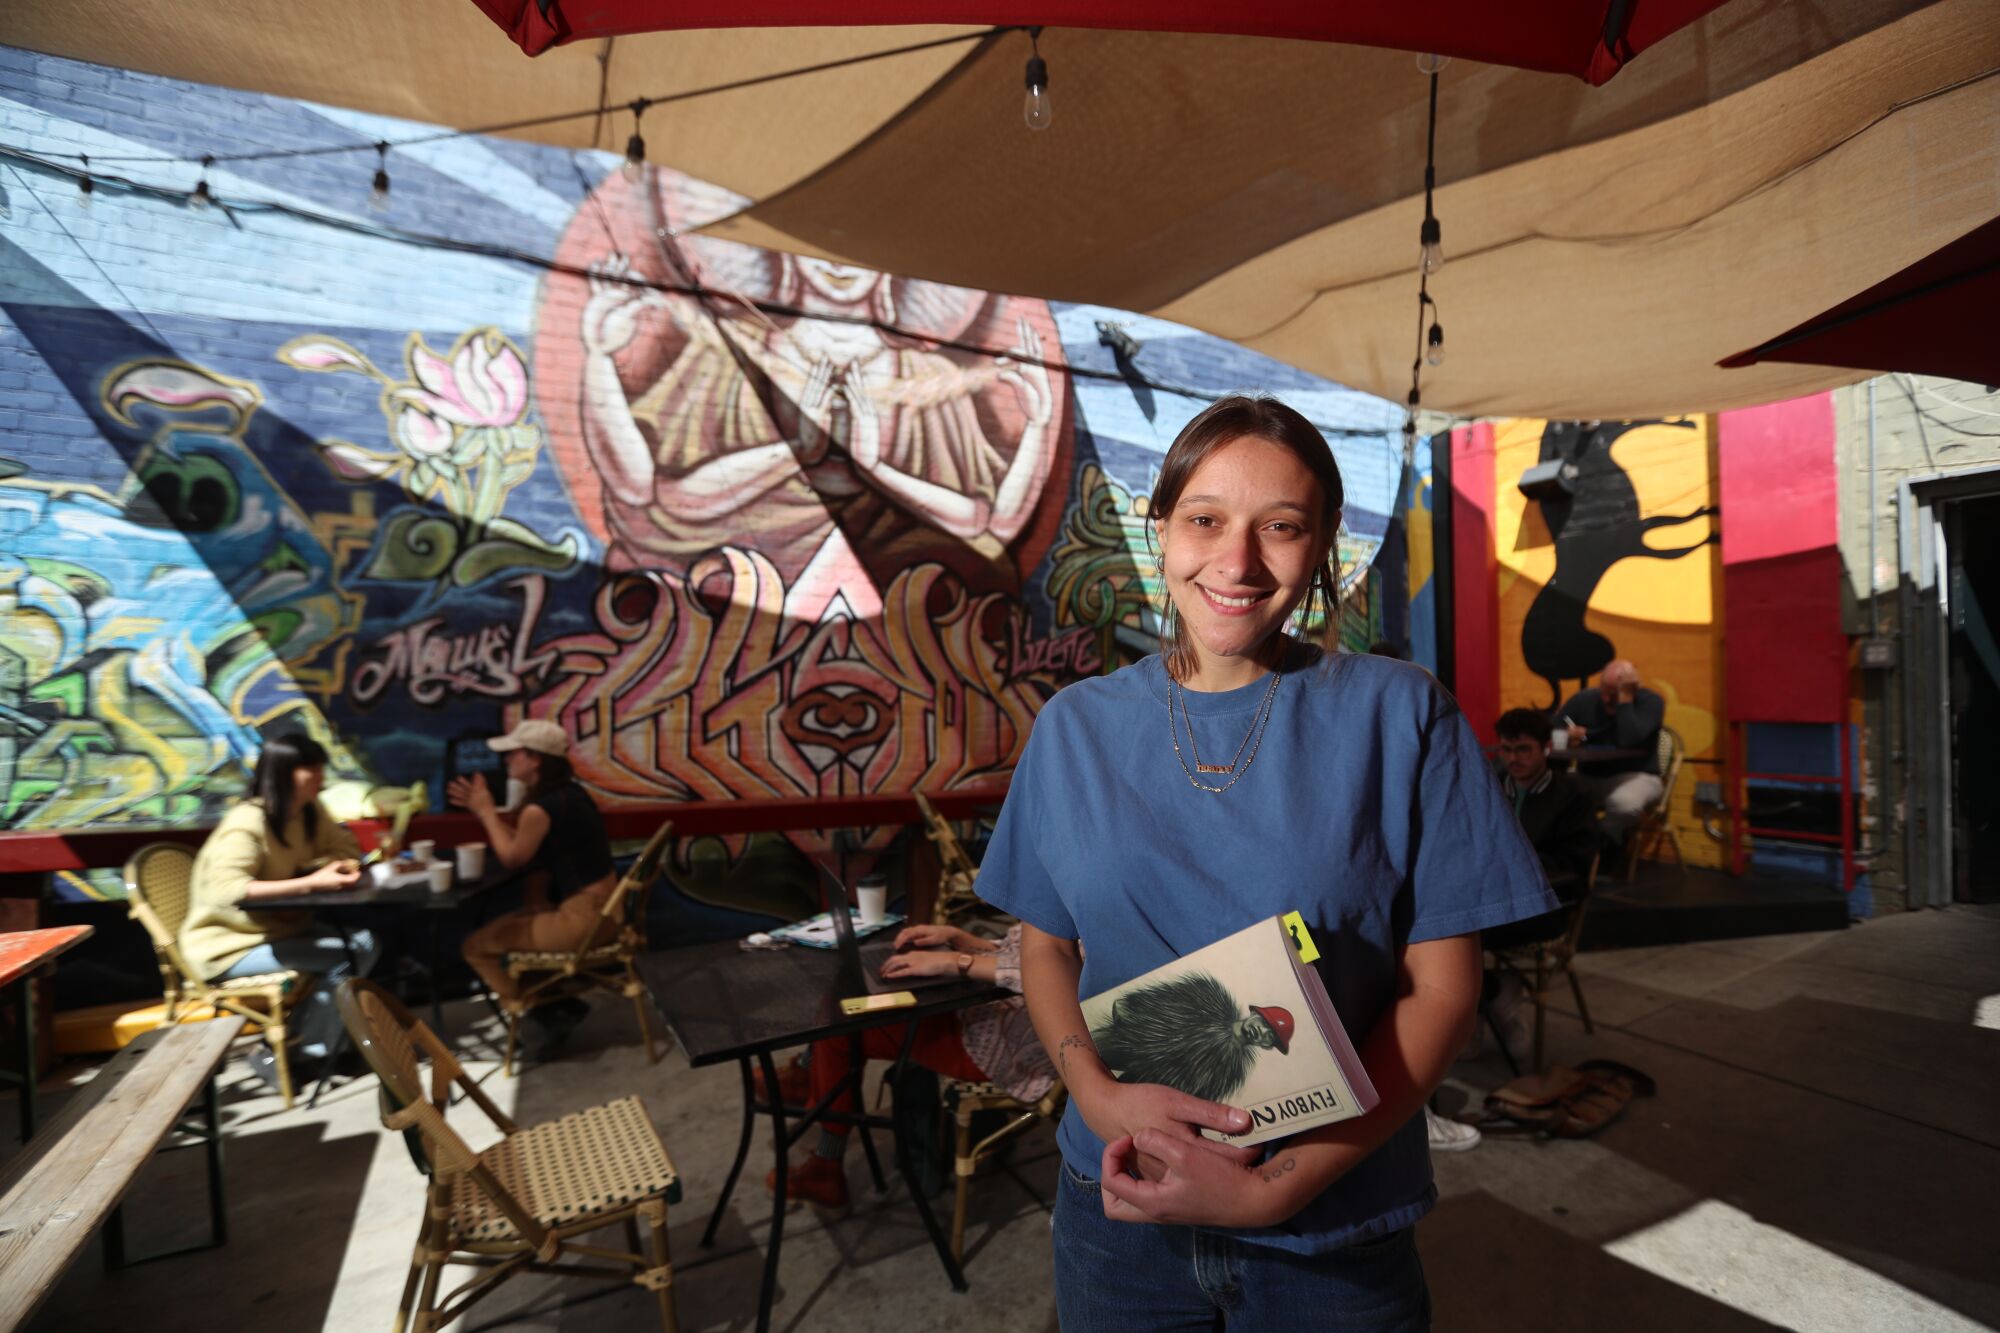 A woman holds a book on an outdoor patio with a mural in the background.